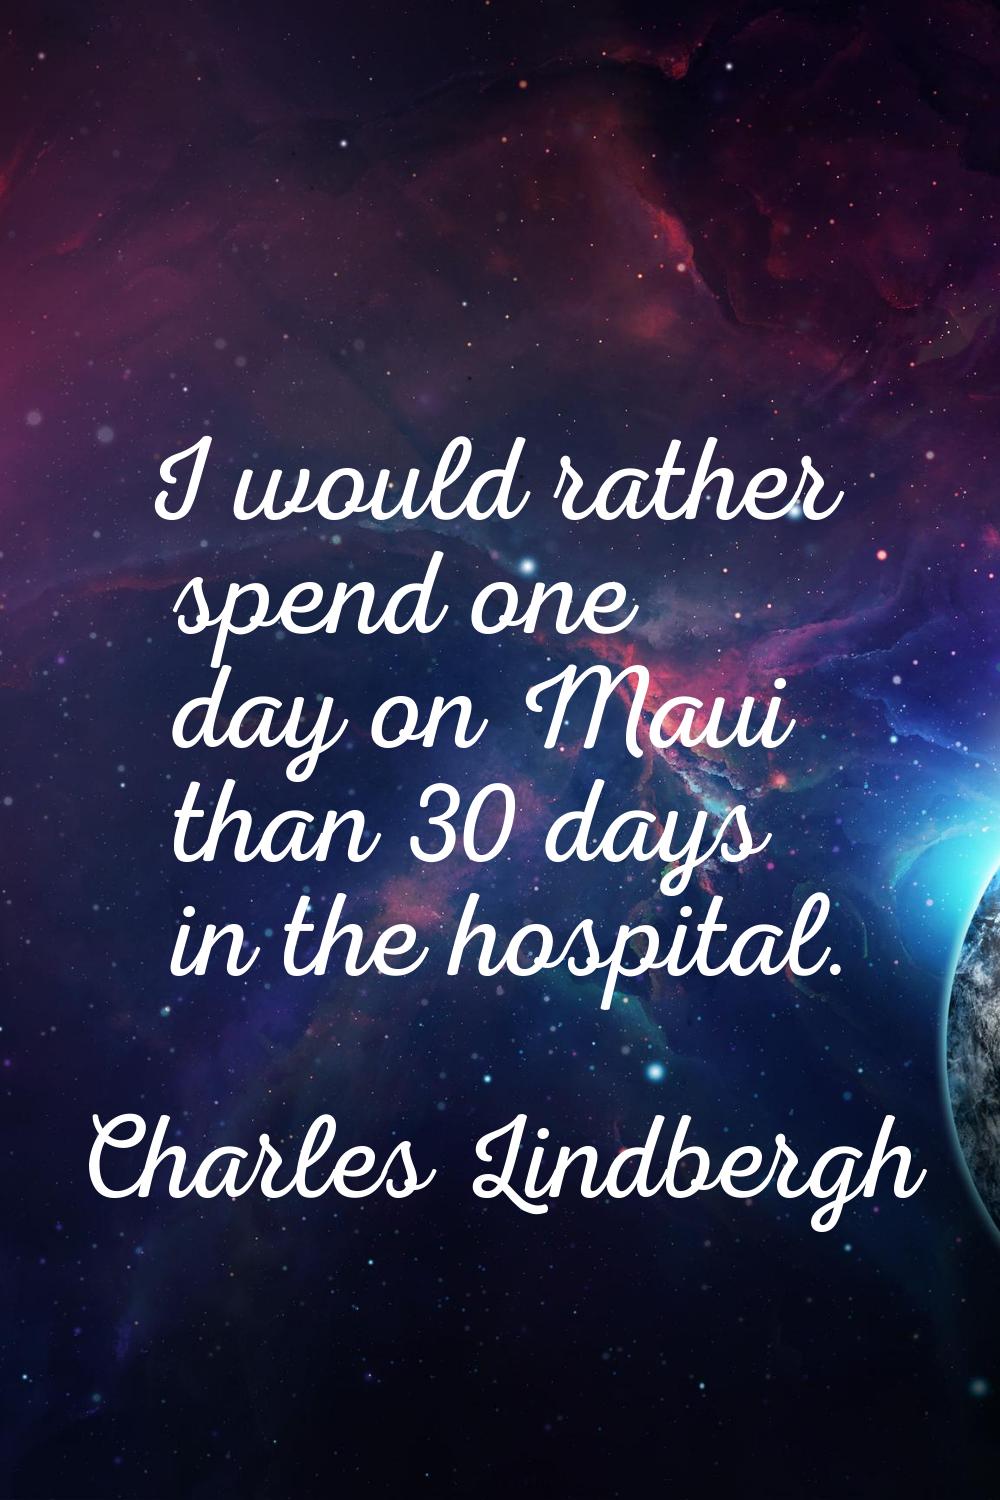 I would rather spend one day on Maui than 30 days in the hospital.